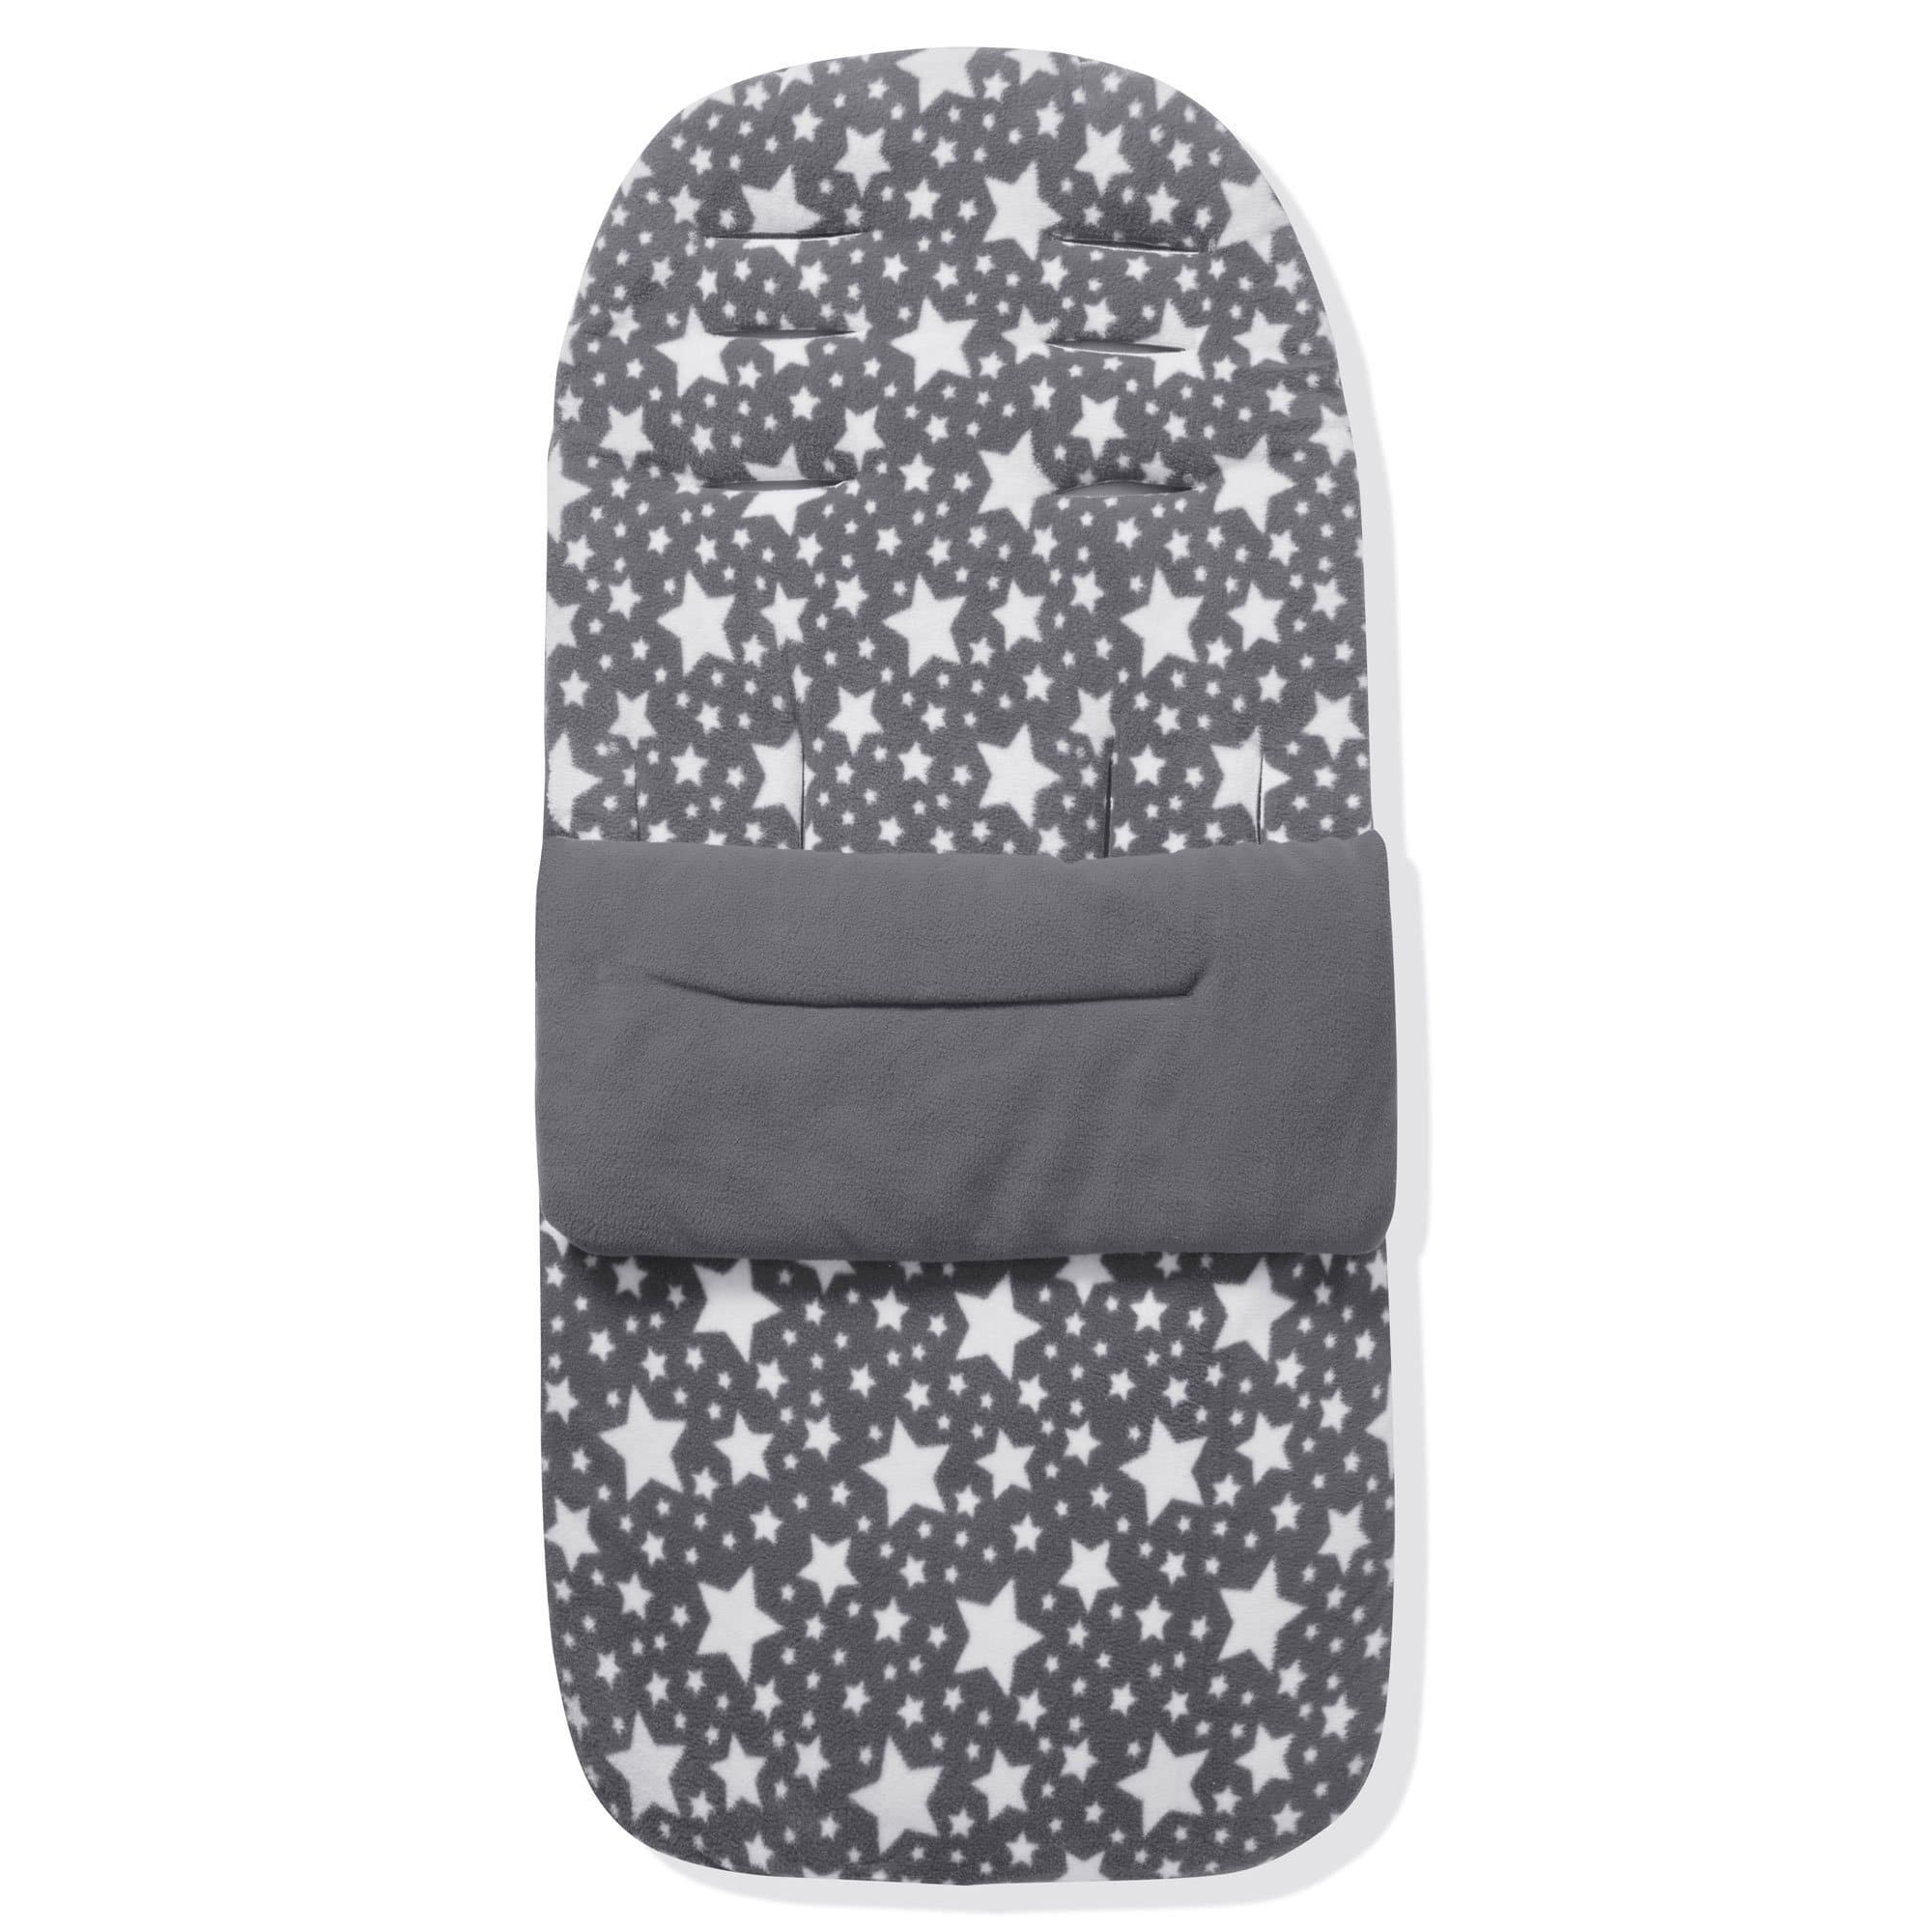 Fleece Footmuff / Cosy Toes Compatible with Babywelt - Grey Star / Fits All Models | For Your Little One